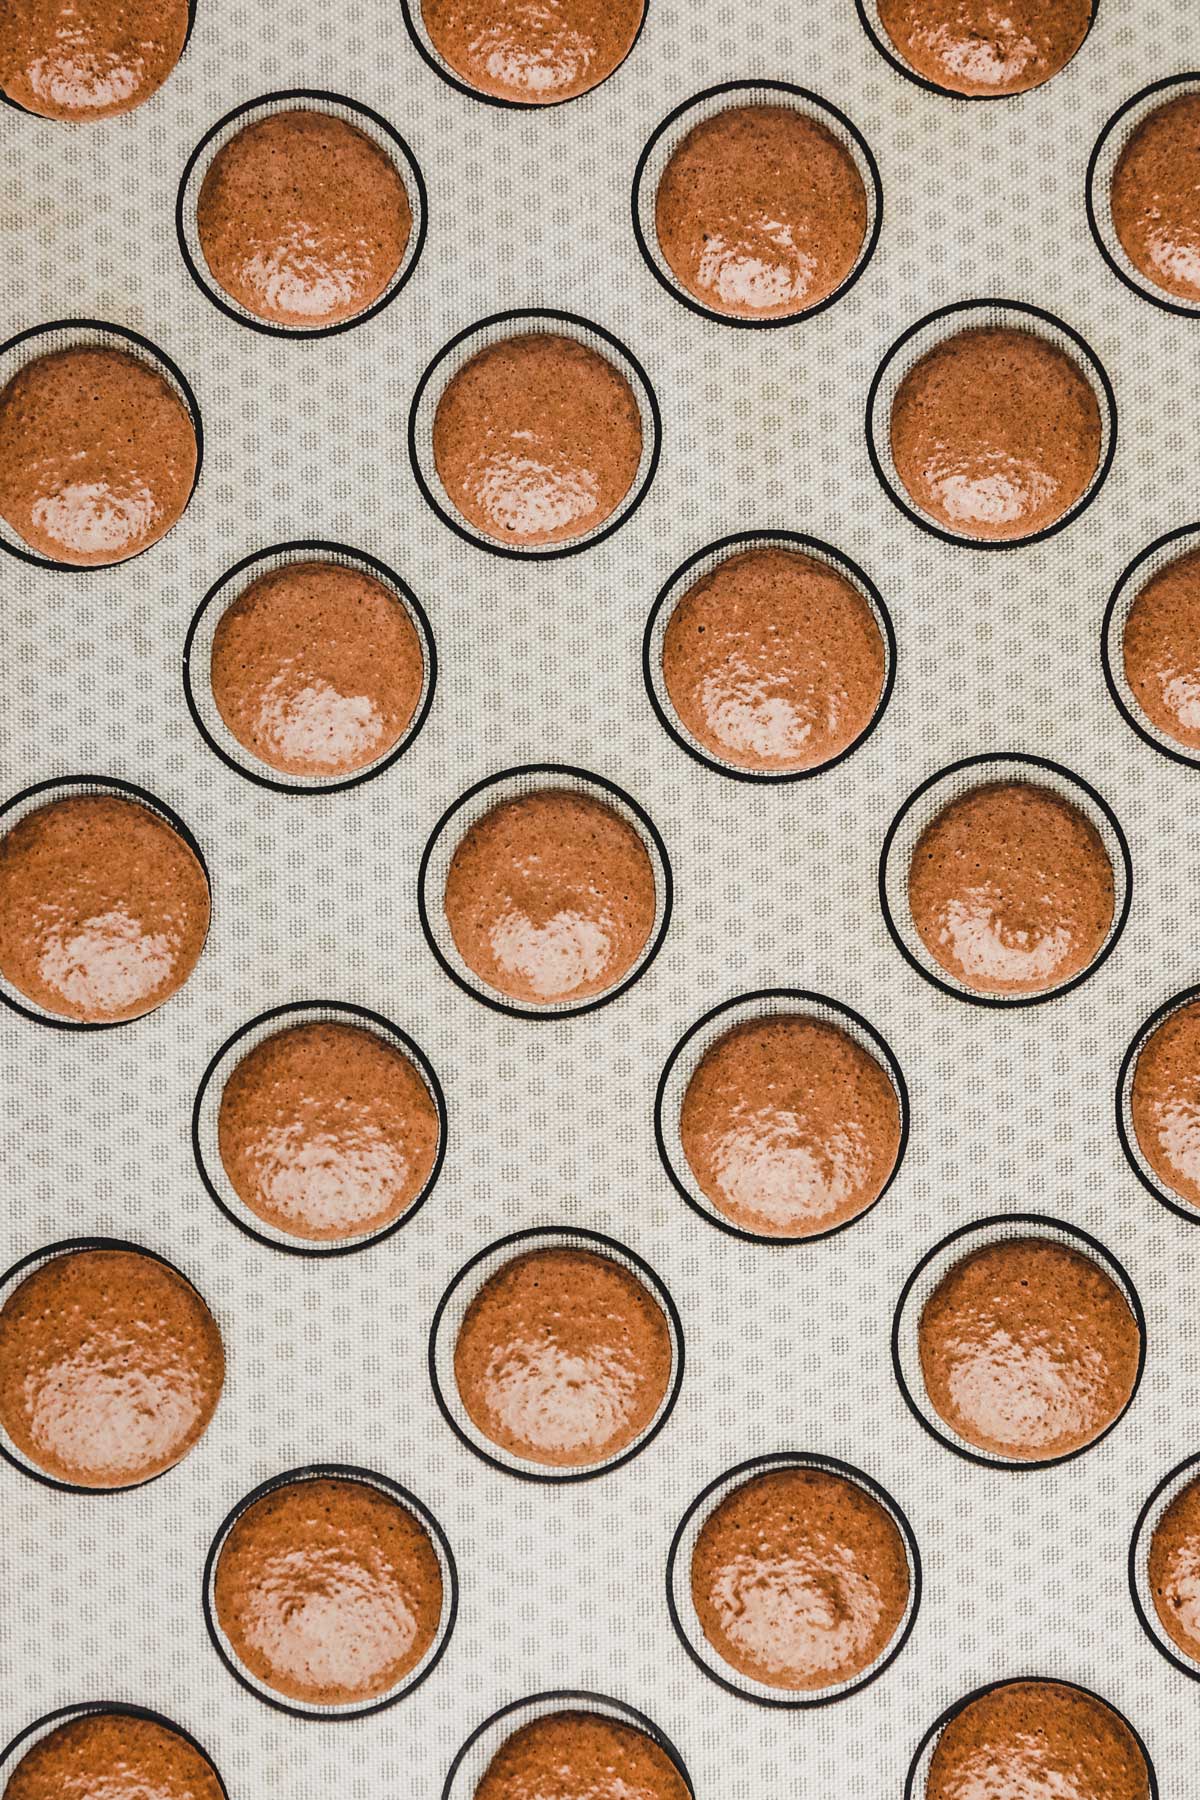 Silicone baking mat with macaron shells